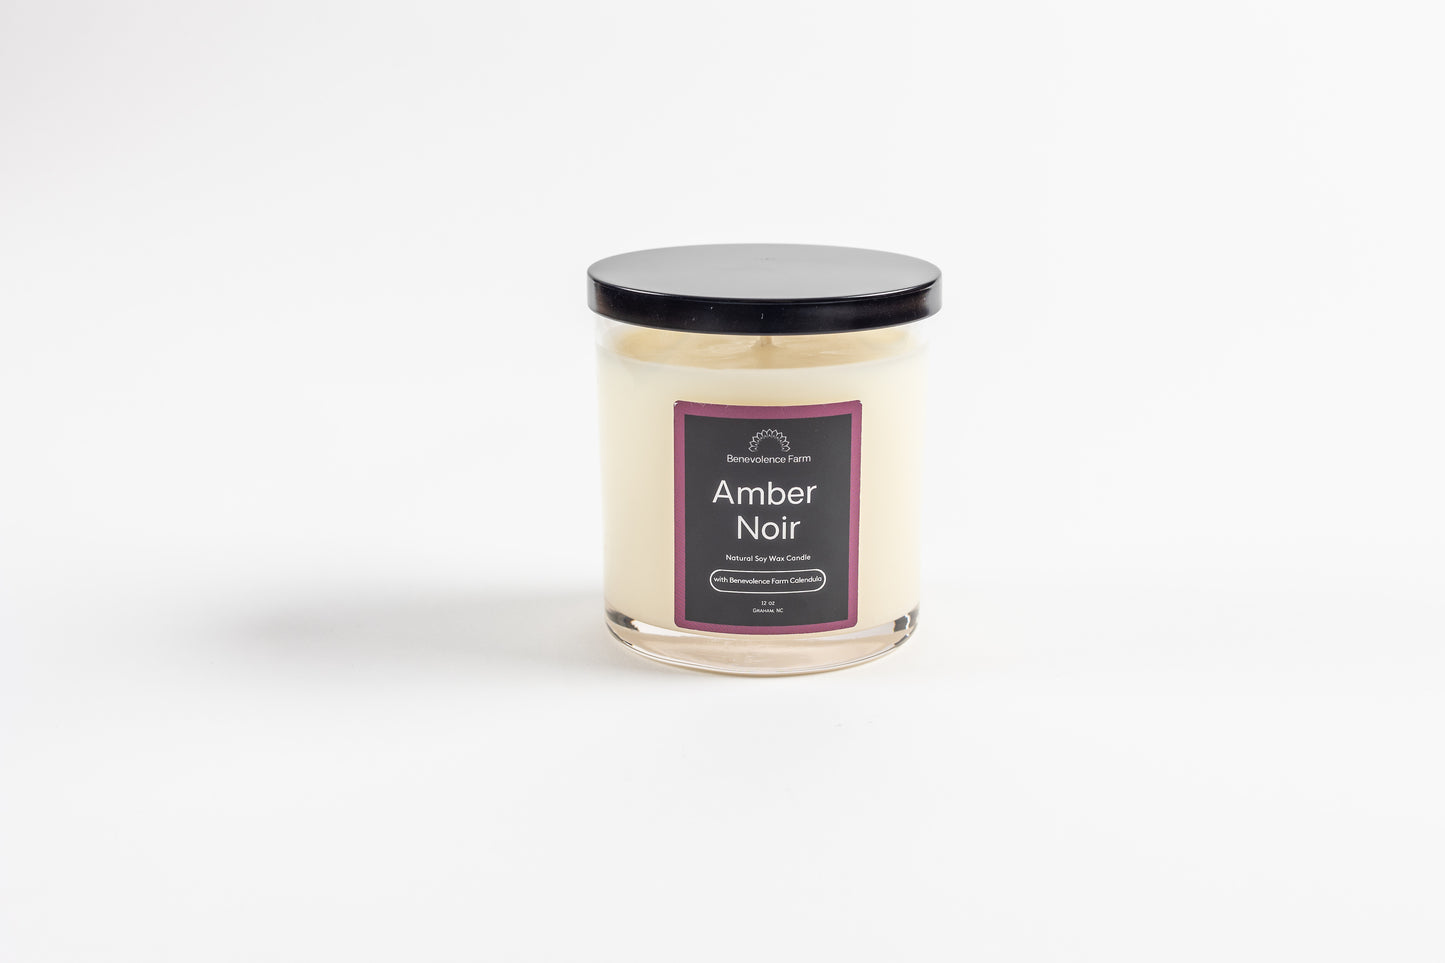 Amber Noir Soy Wax Candle